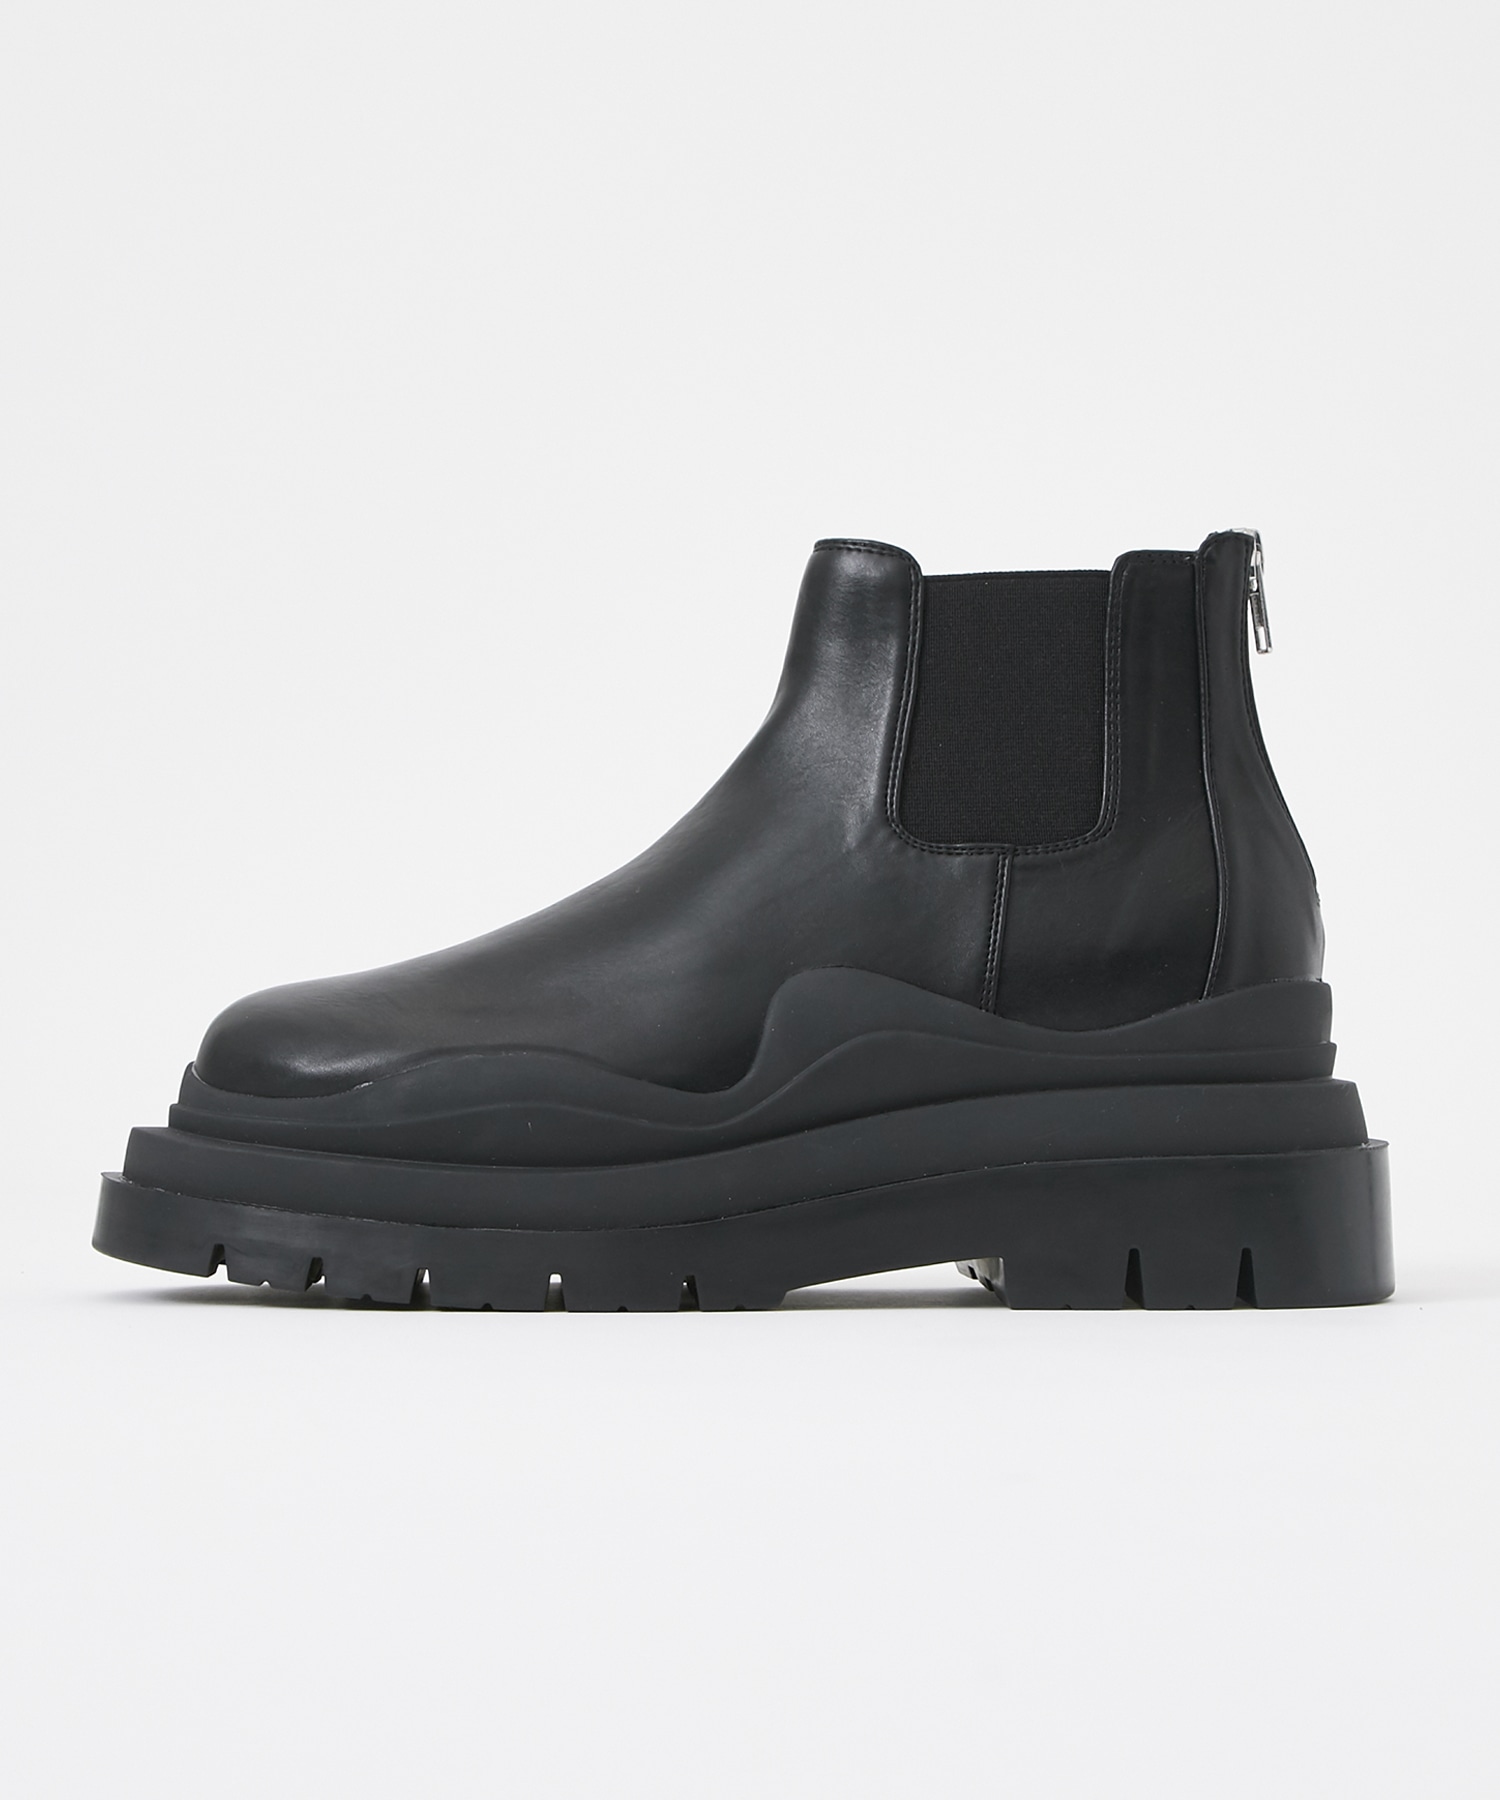 LiNoH TANK SOLE CHELSEA BOOTS 0906